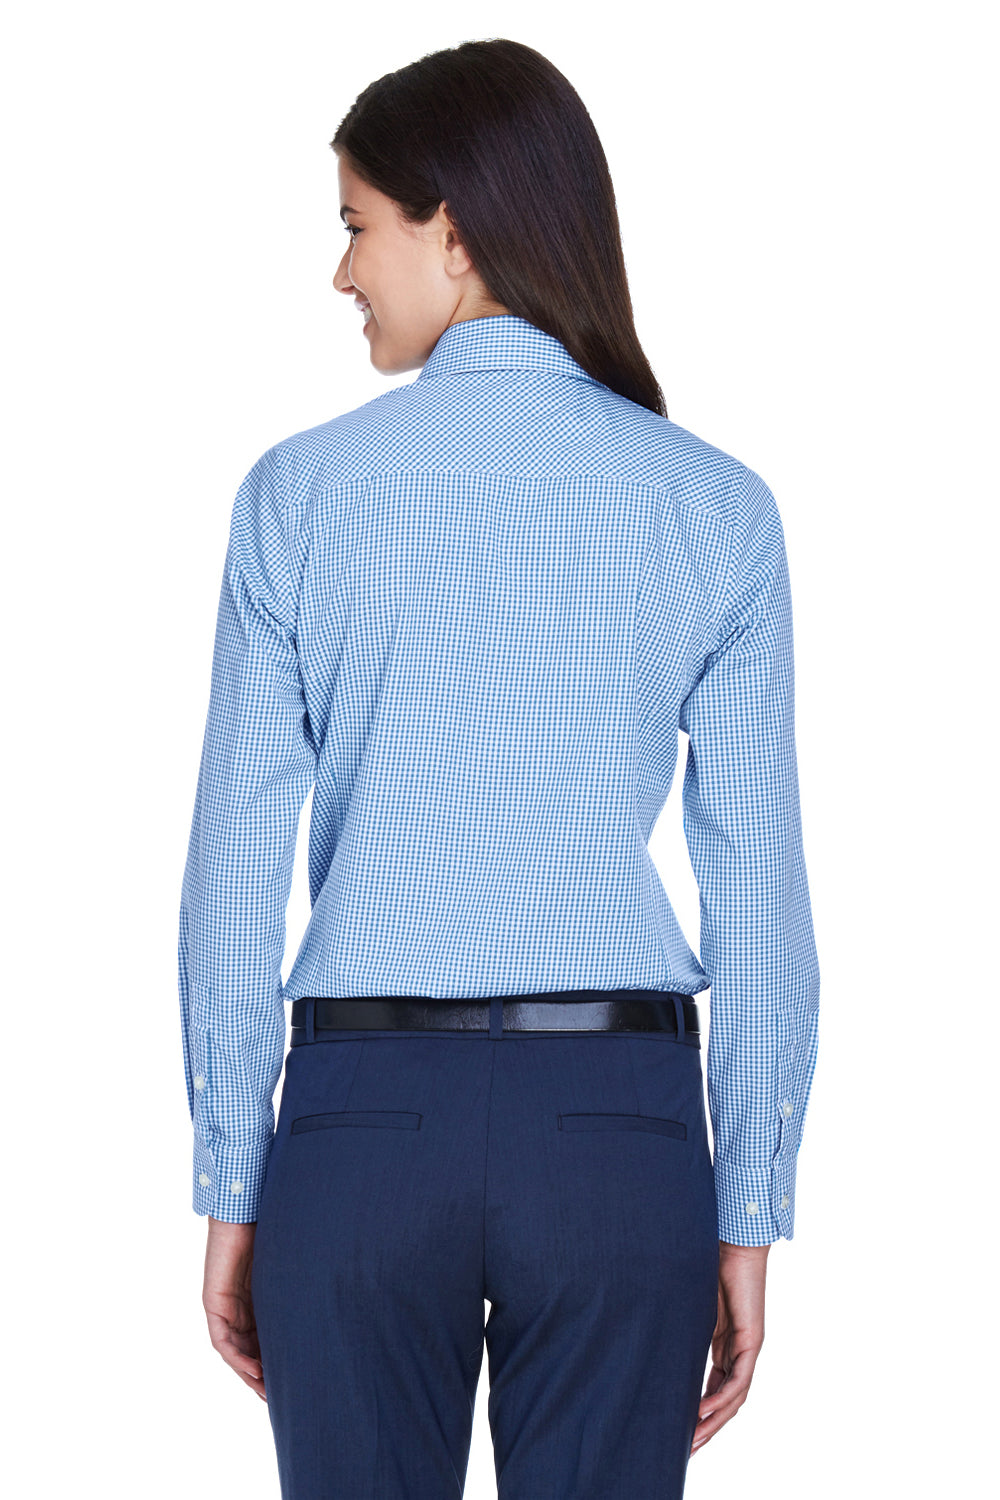 Devon & Jones D640W Womens Crown Woven Collection Wrinkle Resistant Long Sleeve Button Down Shirt French Blue Back